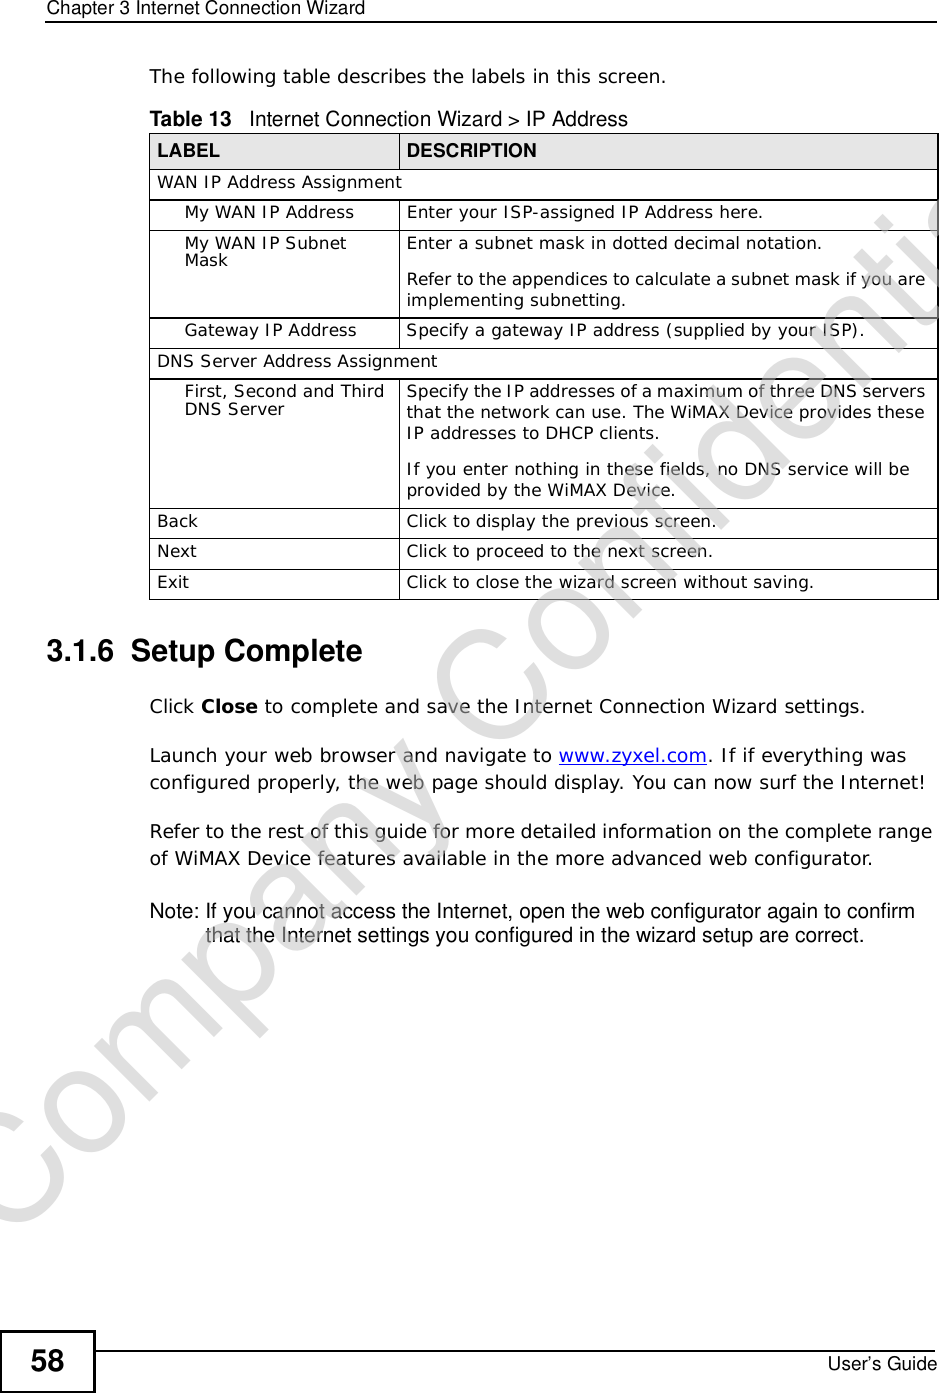 Chapter 3Internet Connection WizardUser’s Guide58The following table describes the labels in this screen.3.1.6  Setup CompleteClick Close to complete and save the Internet Connection Wizard settings.Launch your web browser and navigate to www.zyxel.com. If if everything was configured properly, the web page should display. You can now surf the Internet!Refer to the rest of this guide for more detailed information on the complete range of WiMAX Device features available in the more advanced web configurator. Note: If you cannot access the Internet, open the web configurator again to confirm that the Internet settings you configured in the wizard setup are correct.Table 13   Internet Connection Wizard &gt; IP AddressLABEL DESCRIPTIONWAN IP Address AssignmentMy WAN IP AddressEnter your ISP-assigned IP Address here.My WAN IP Subnet Mask Enter a subnet mask in dotted decimal notation. Refer to the appendicesto calculate a subnet mask if you are implementing subnetting.Gateway IP AddressSpecify a gateway IP address (supplied by your ISP).DNS Server Address AssignmentFirst, Second and Third DNS Server Specify the IP addresses of a maximum of three DNS servers that the network can use. The WiMAX Device provides these IP addresses to DHCP clients.If you enter nothing in these fields, no DNS service will be provided by the WiMAX Device.BackClick to display the previous screen.Next Click to proceed to the next screen.Exit Click to close the wizard screen without saving.Company Confidential